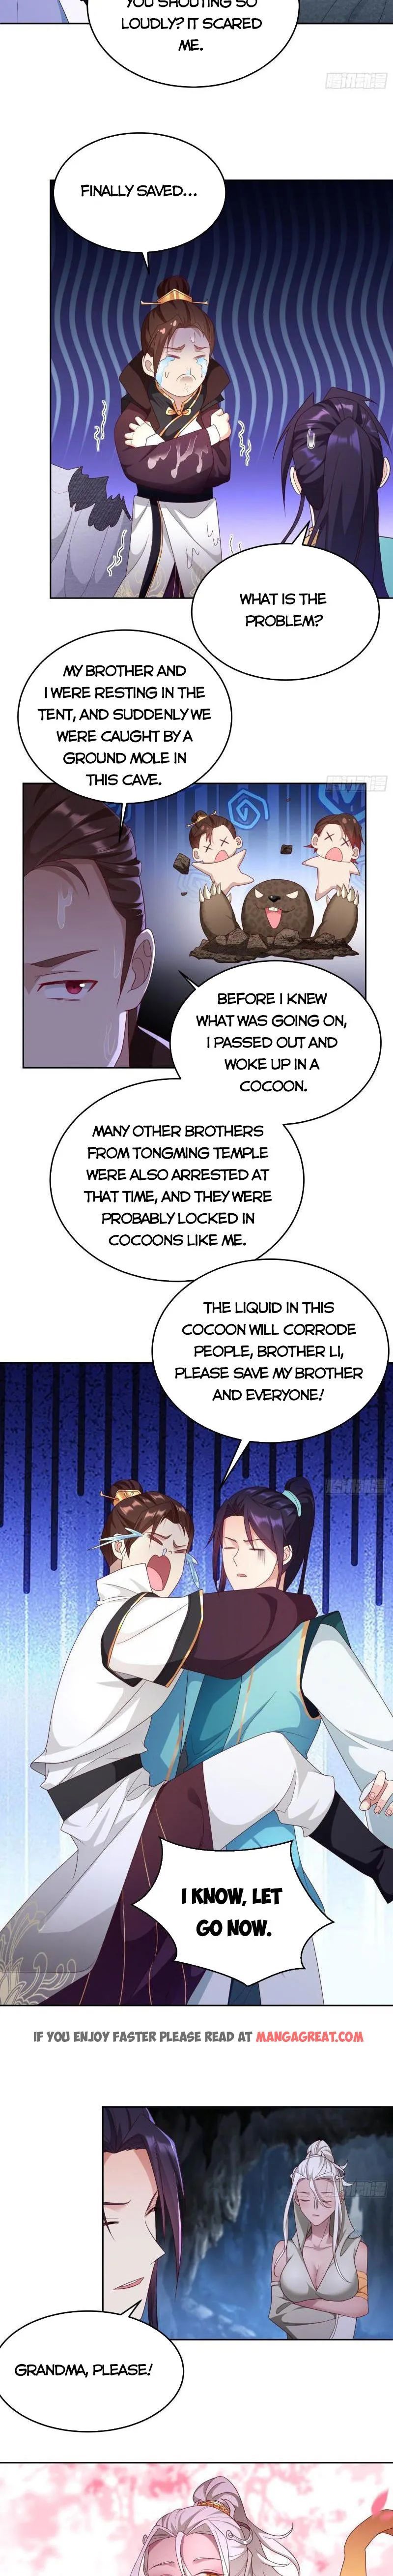 Forced to Become the Villain's Son-in-law Chapter 396 page 3